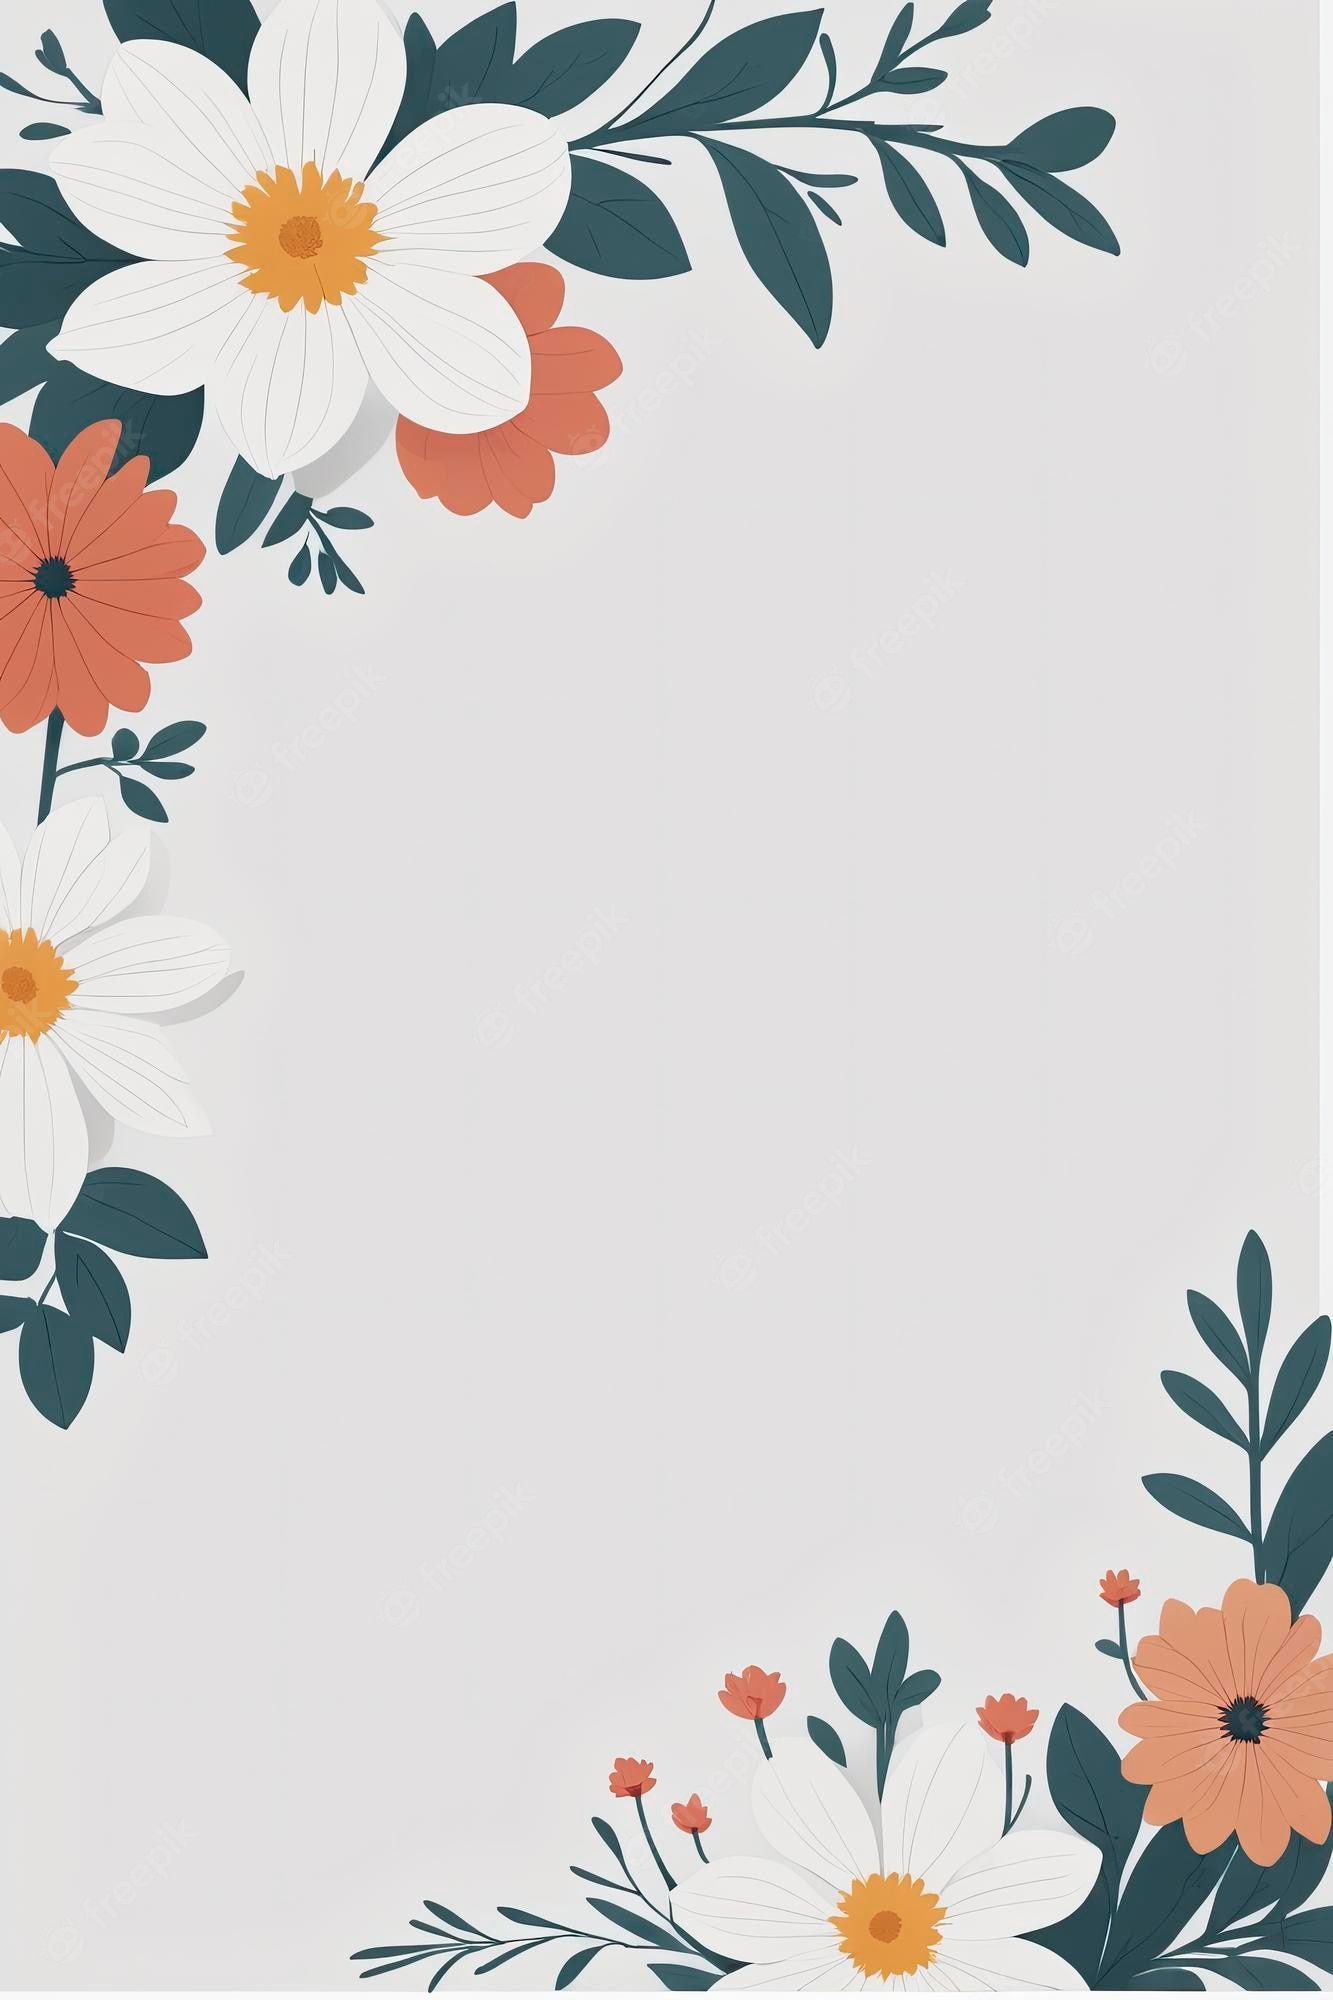 A white background with a floral border - Border